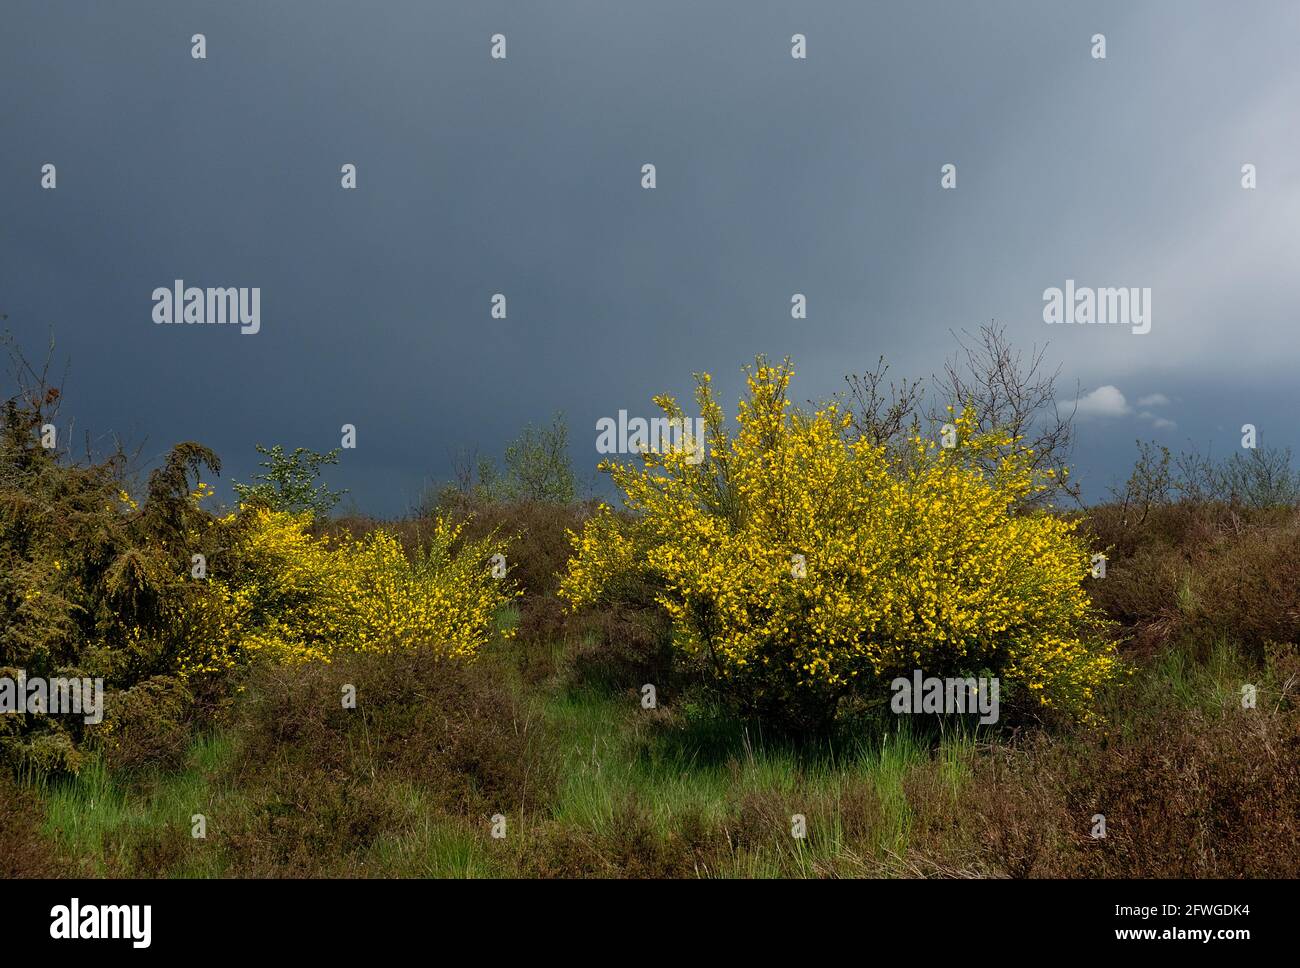 Flowering Common broom on heatherland, the yellow sunlit flowers contrast strongly with the dark rain clouds in the background Stock Photo